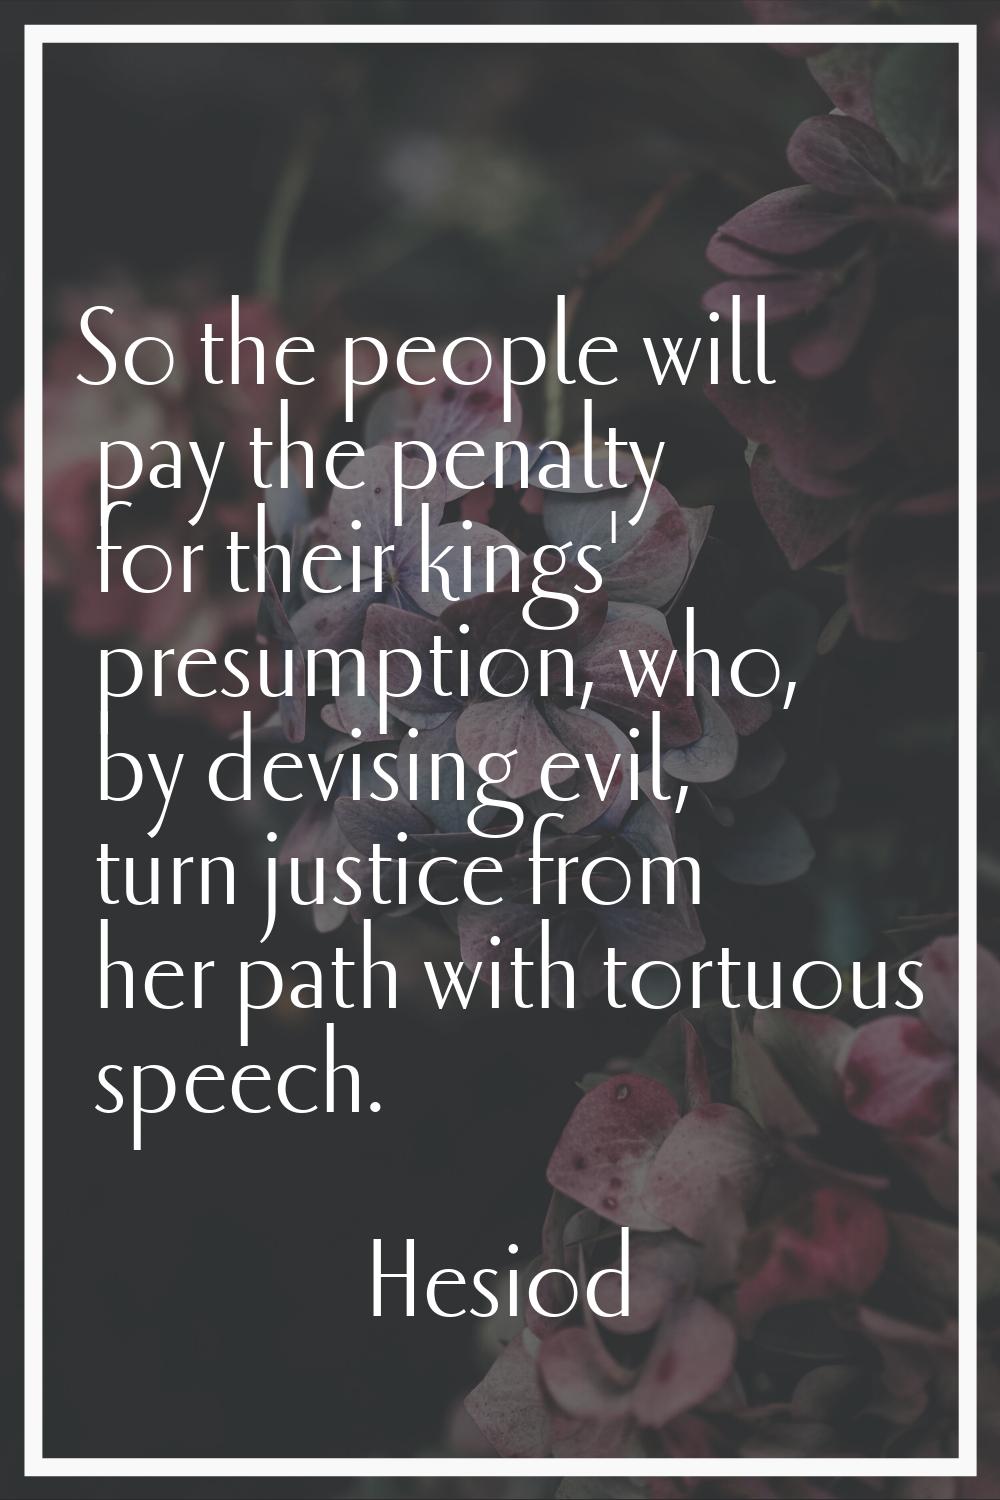 So the people will pay the penalty for their kings' presumption, who, by devising evil, turn justic